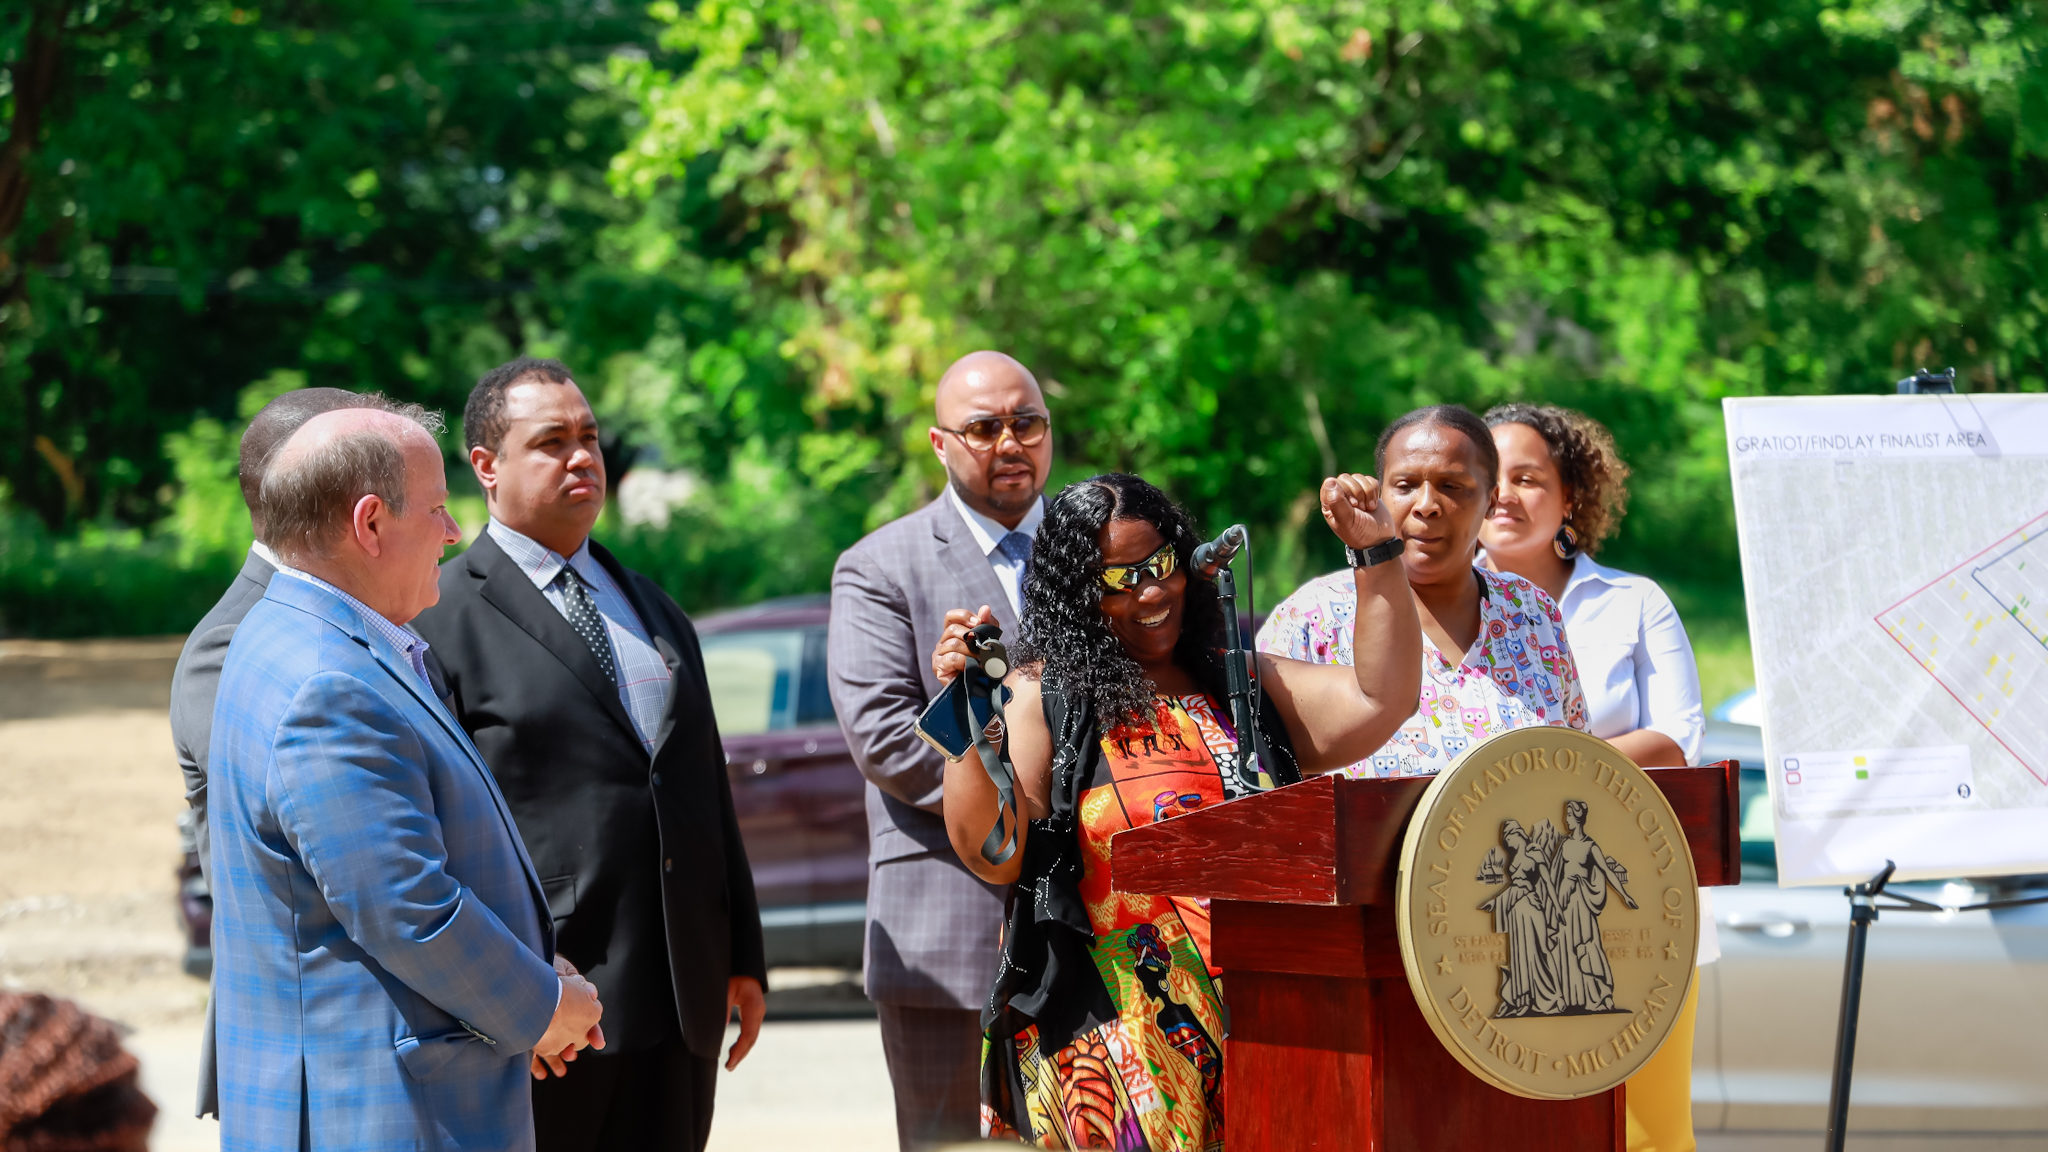 City selects first Detroit neighborhoods to house solar fields – WDET 101.9 FM